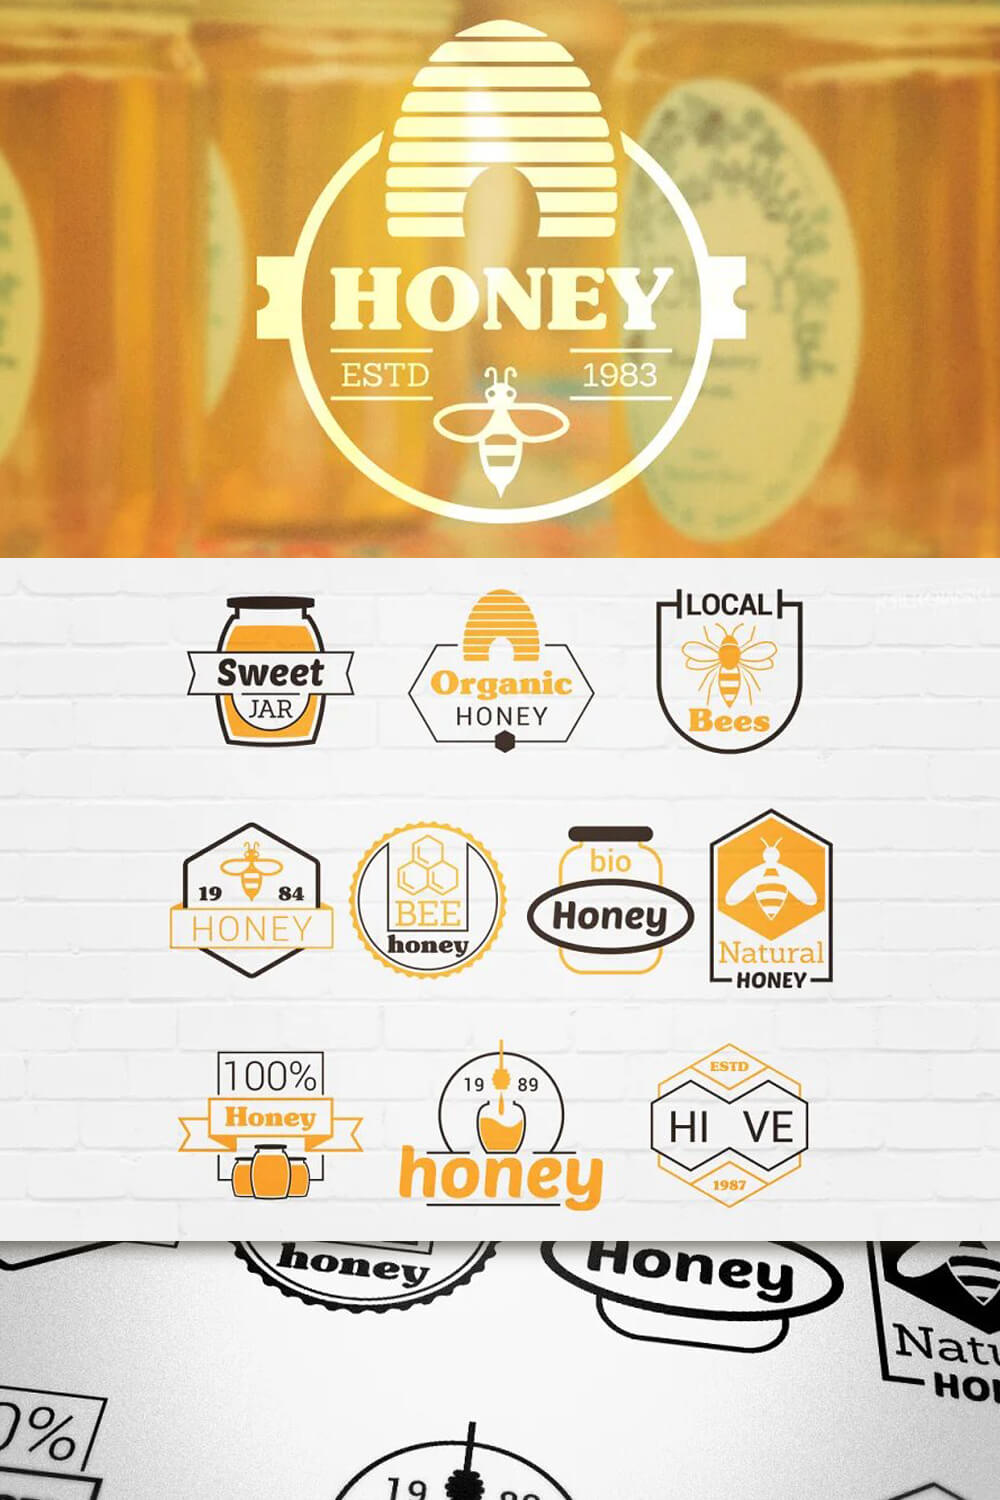 Honey logos in orange, black and white are depicted on a white brick background.